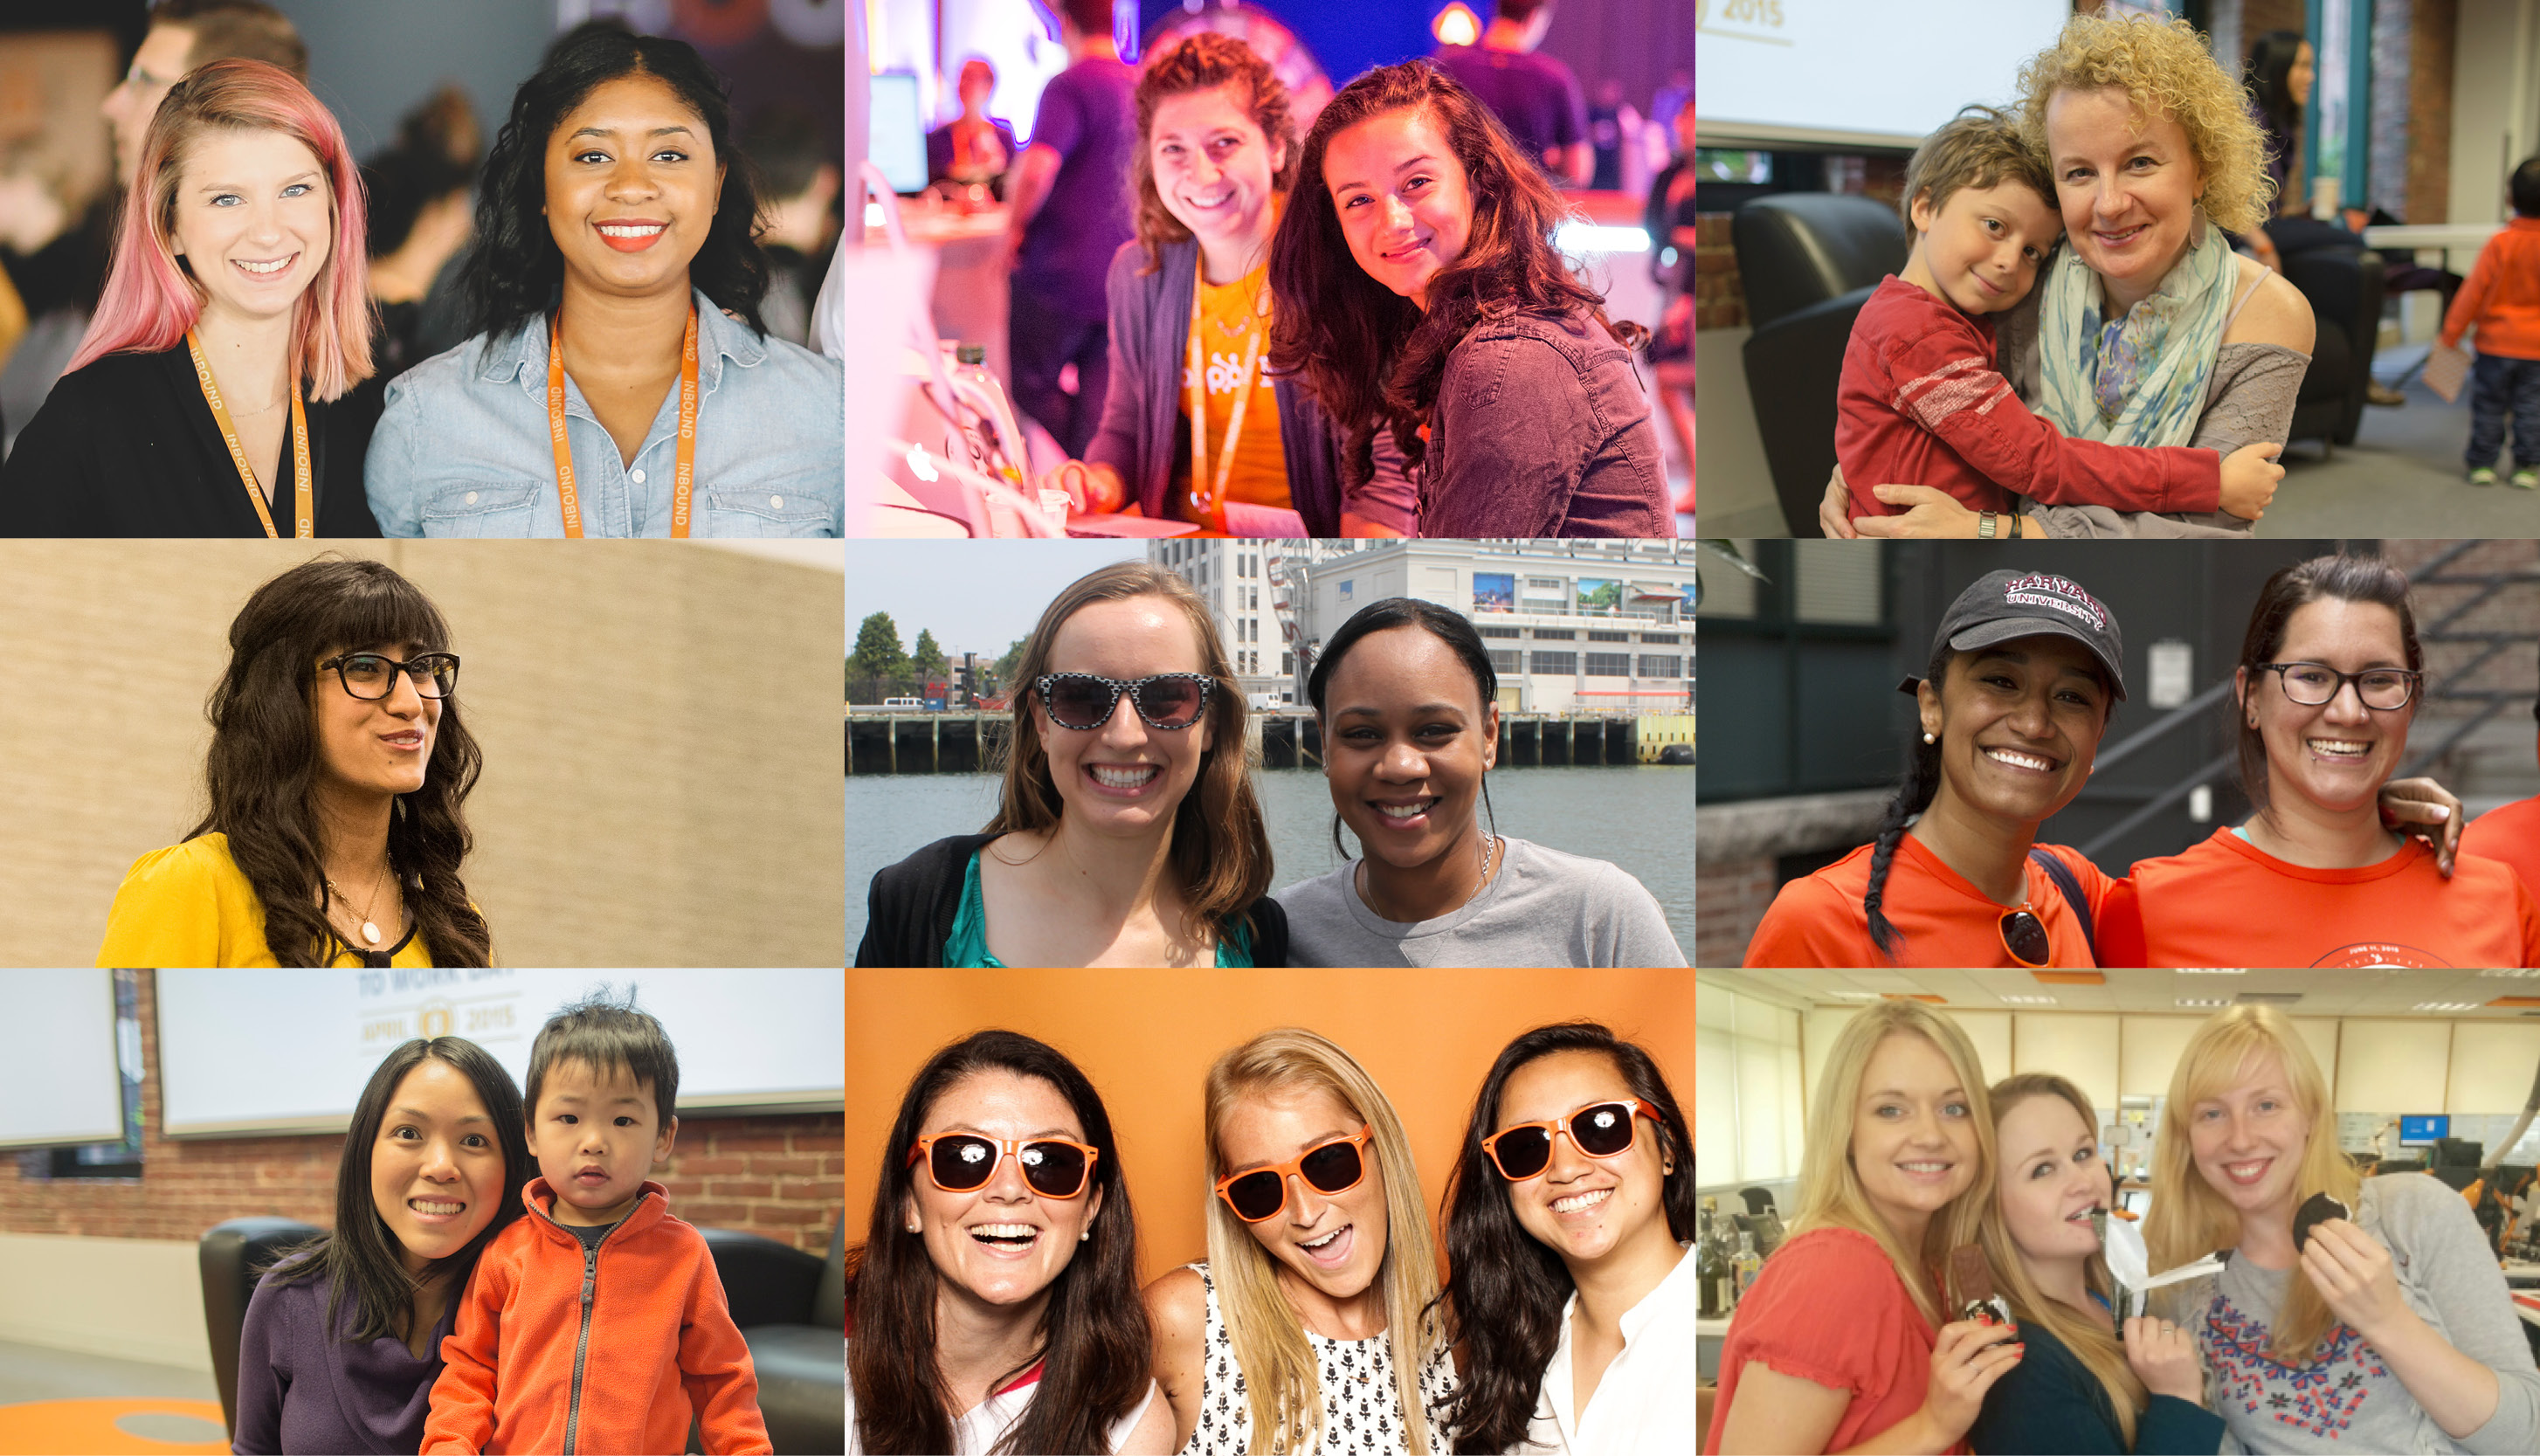 HubSpot Named a 2015 Best Workplace for Women by Fortune.com